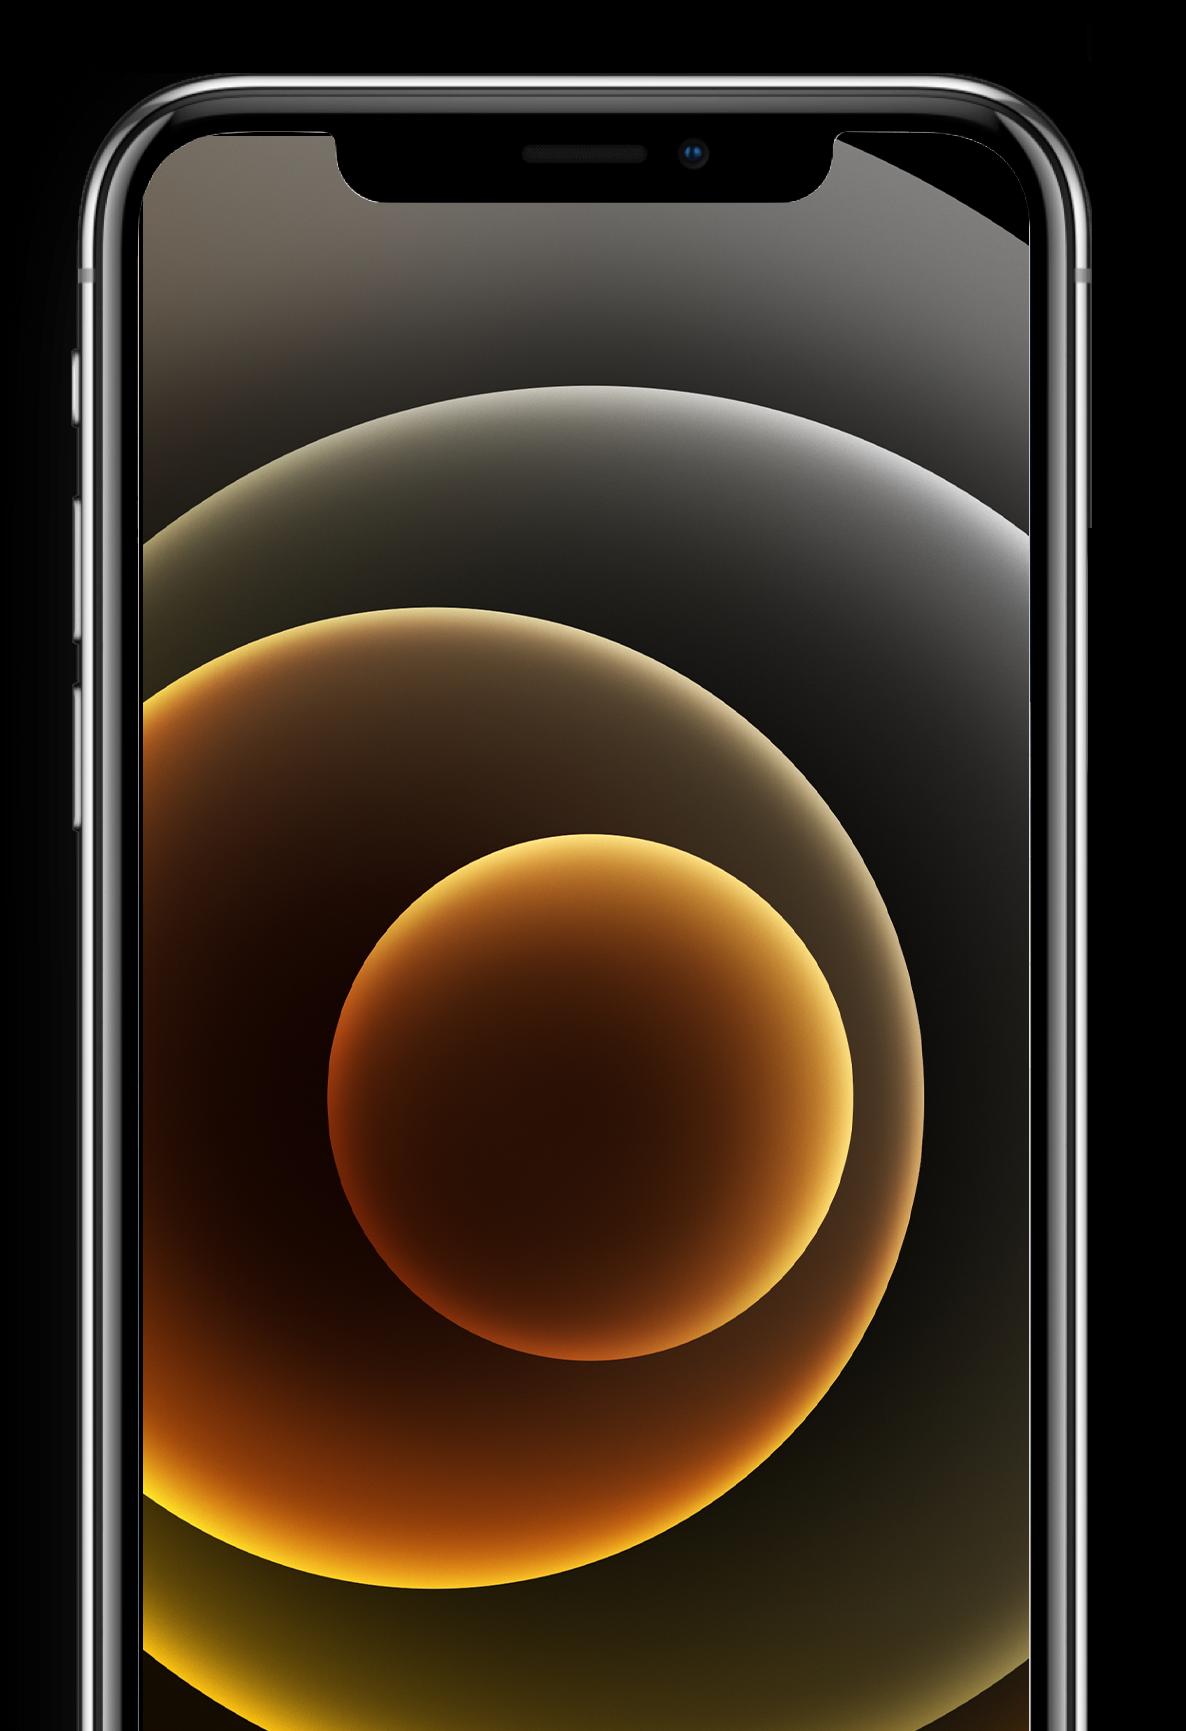 Iphone 12 Pro Wallpapers 4k For Android Apk Download